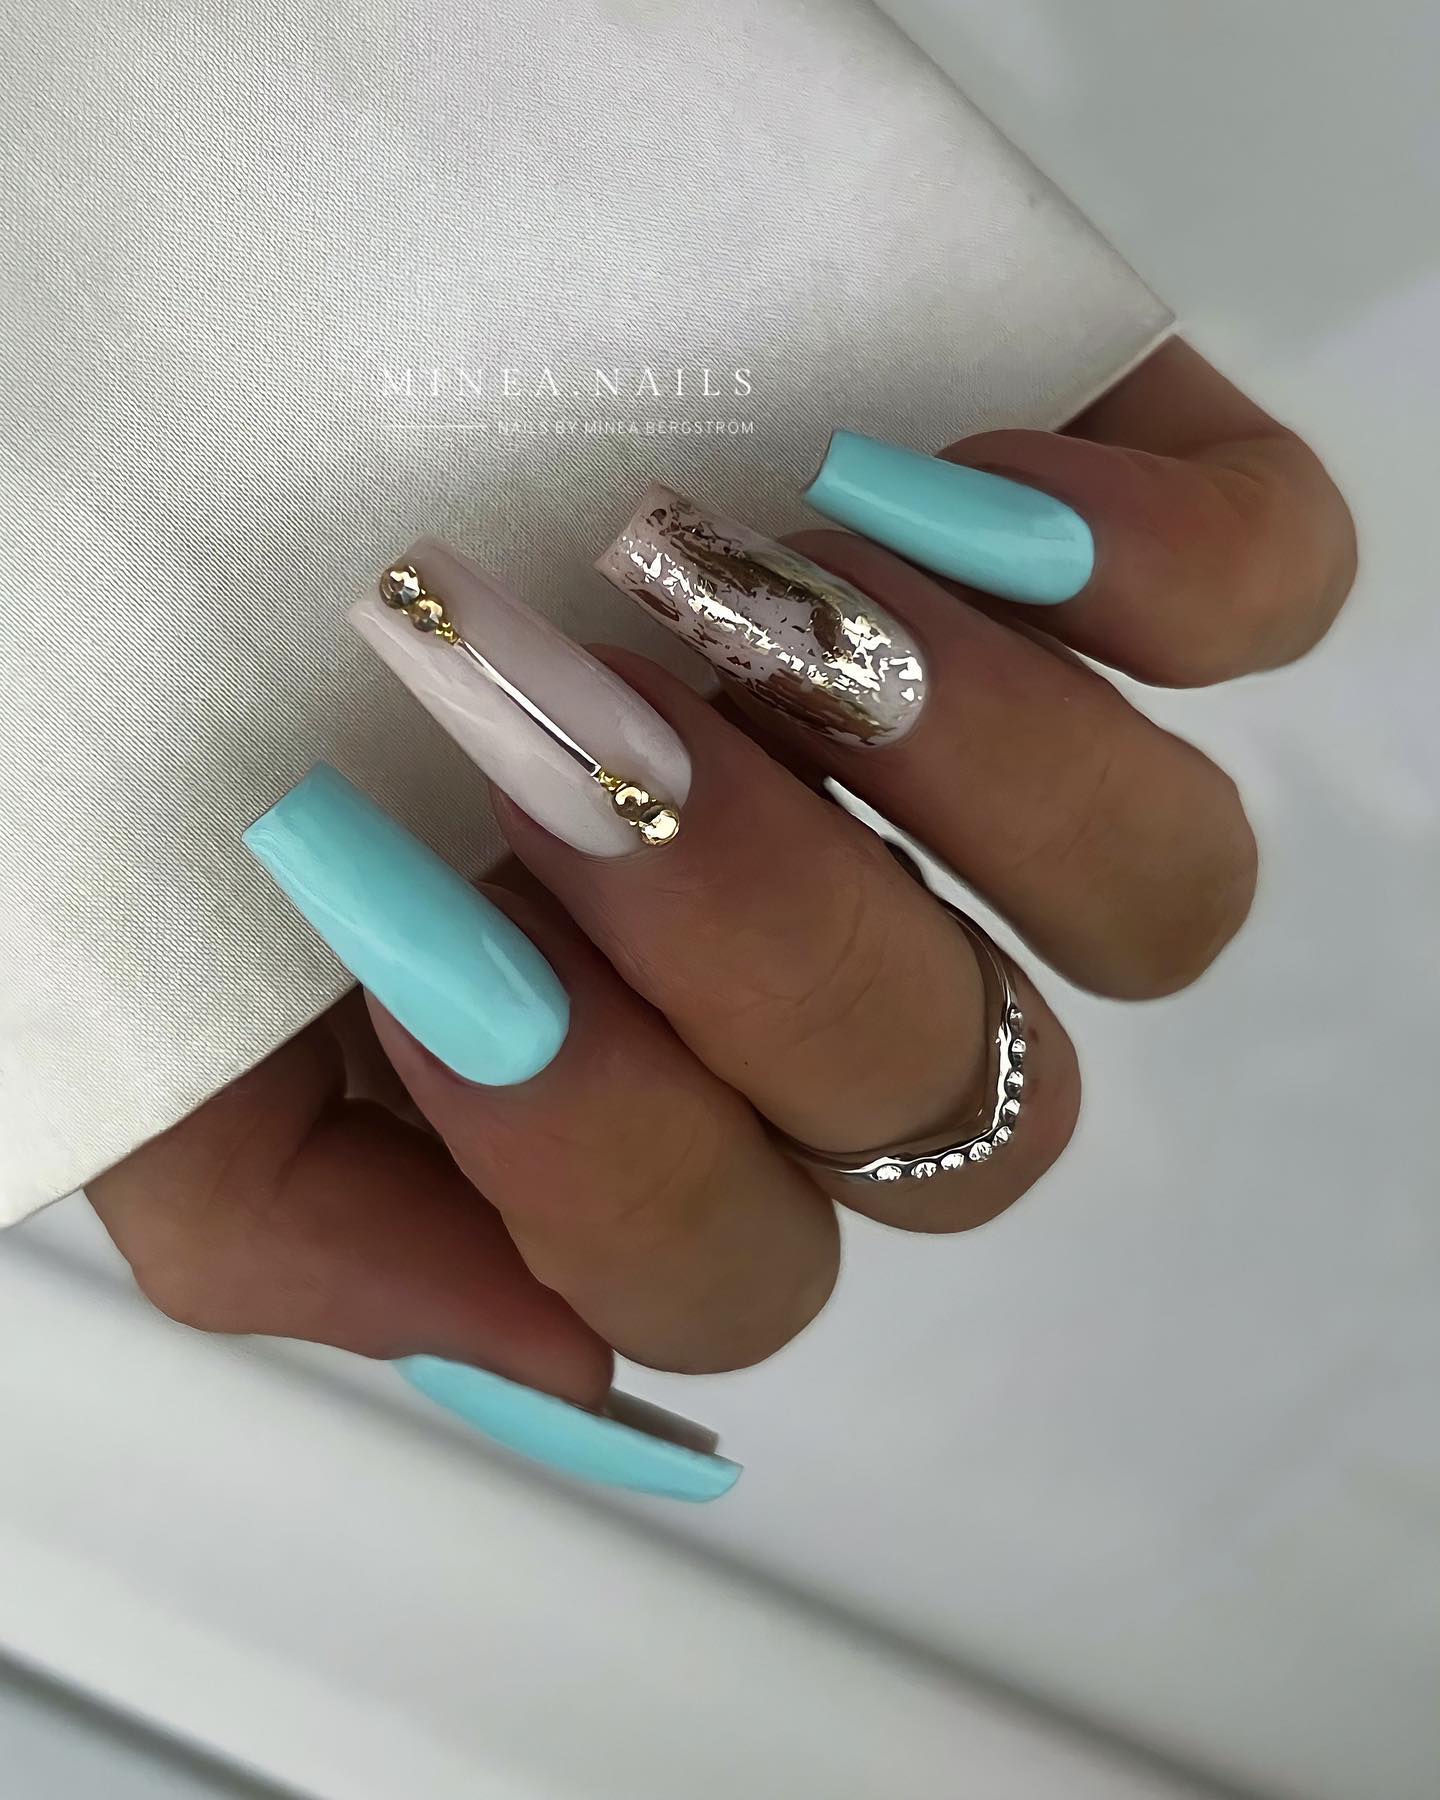 Long Square Pastel Blue and Nude Nails with Gold Foil